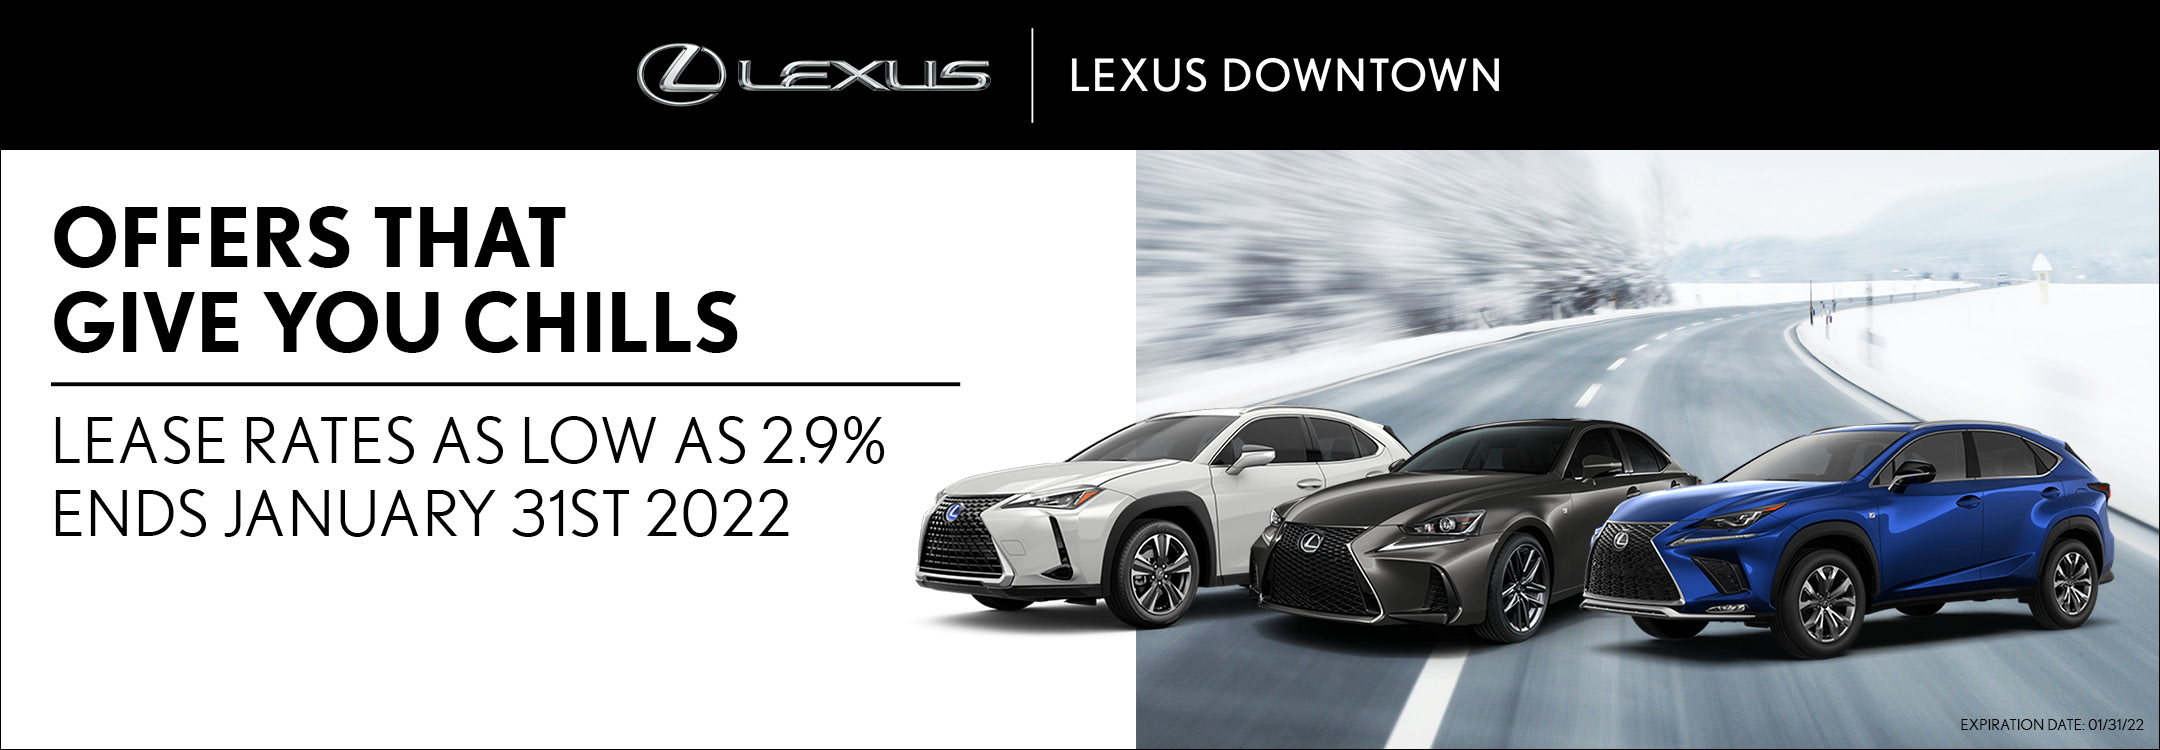 Offers that give you chills at Lexus Downtown